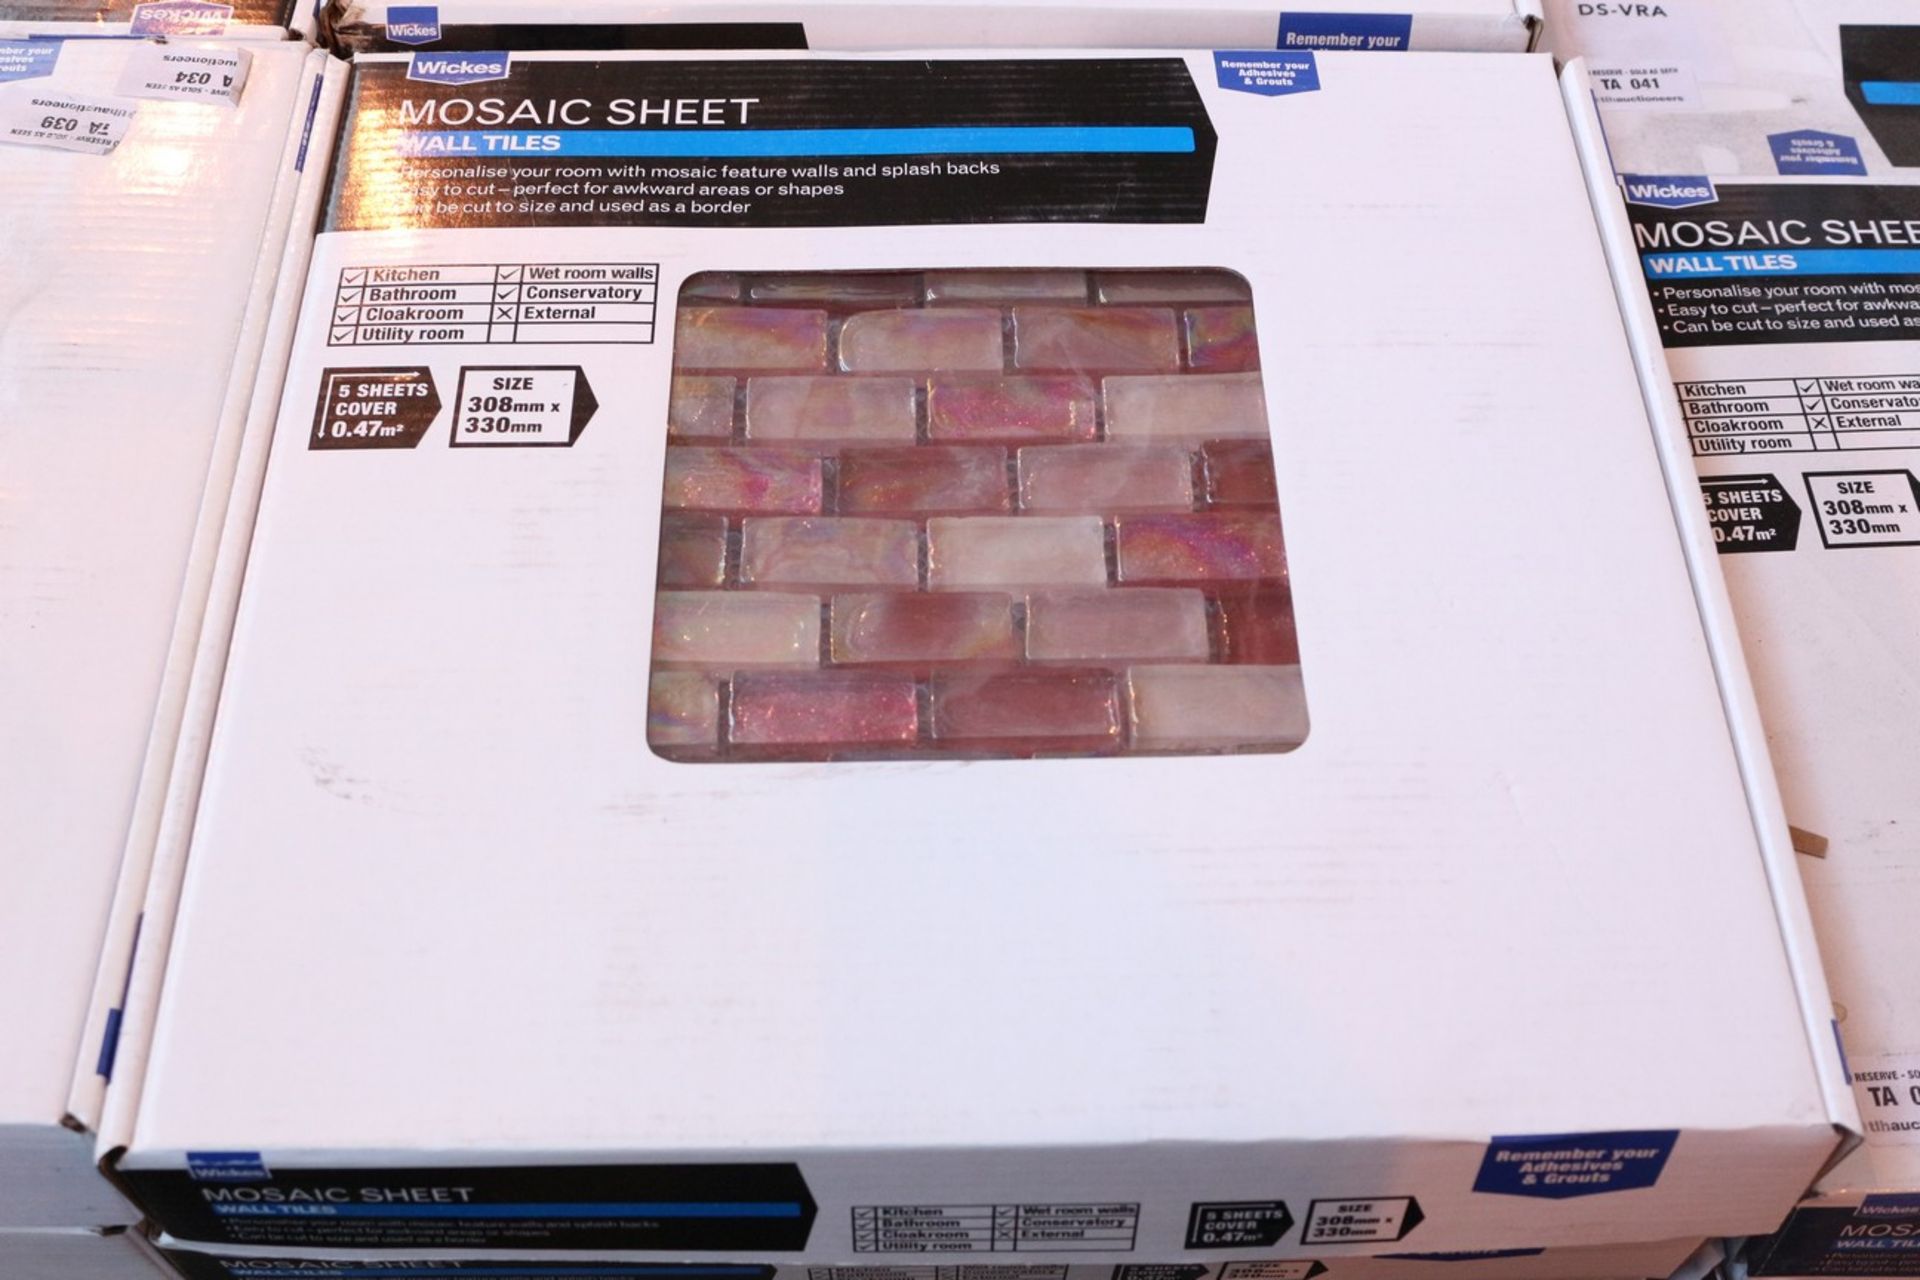 4X BY WICKES BOXED BRAND NEW MOSAIC SHEET WALL TILES IN PINK 308MMX330MM COMBINED RRP £199 (DS-VRA) - Image 2 of 2